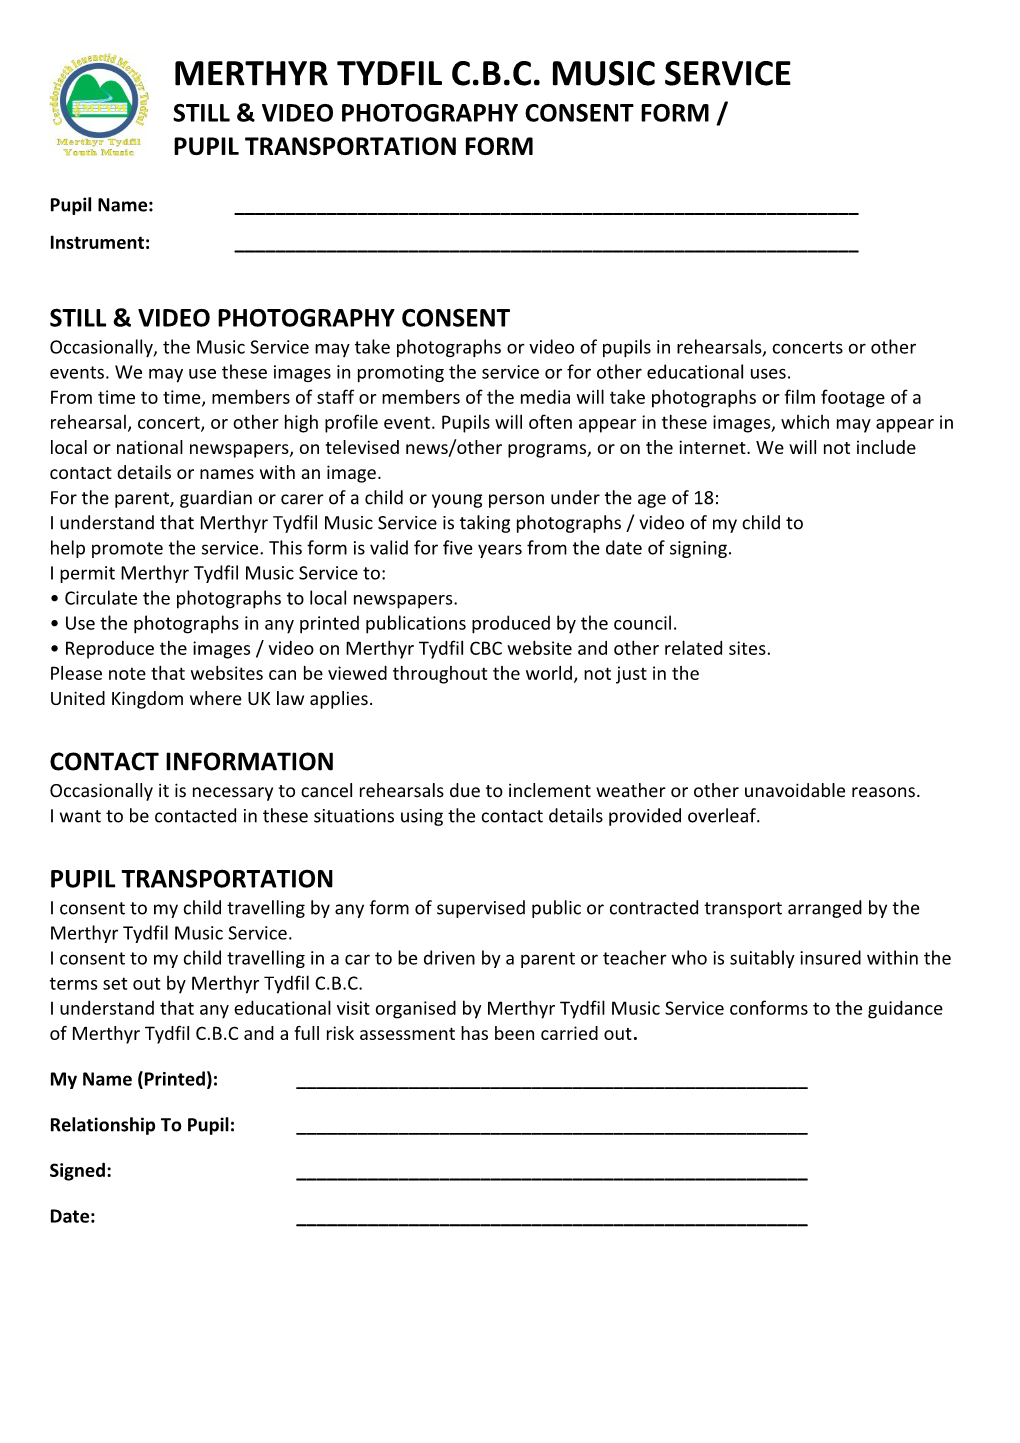 Still & Video Photography Consent Form